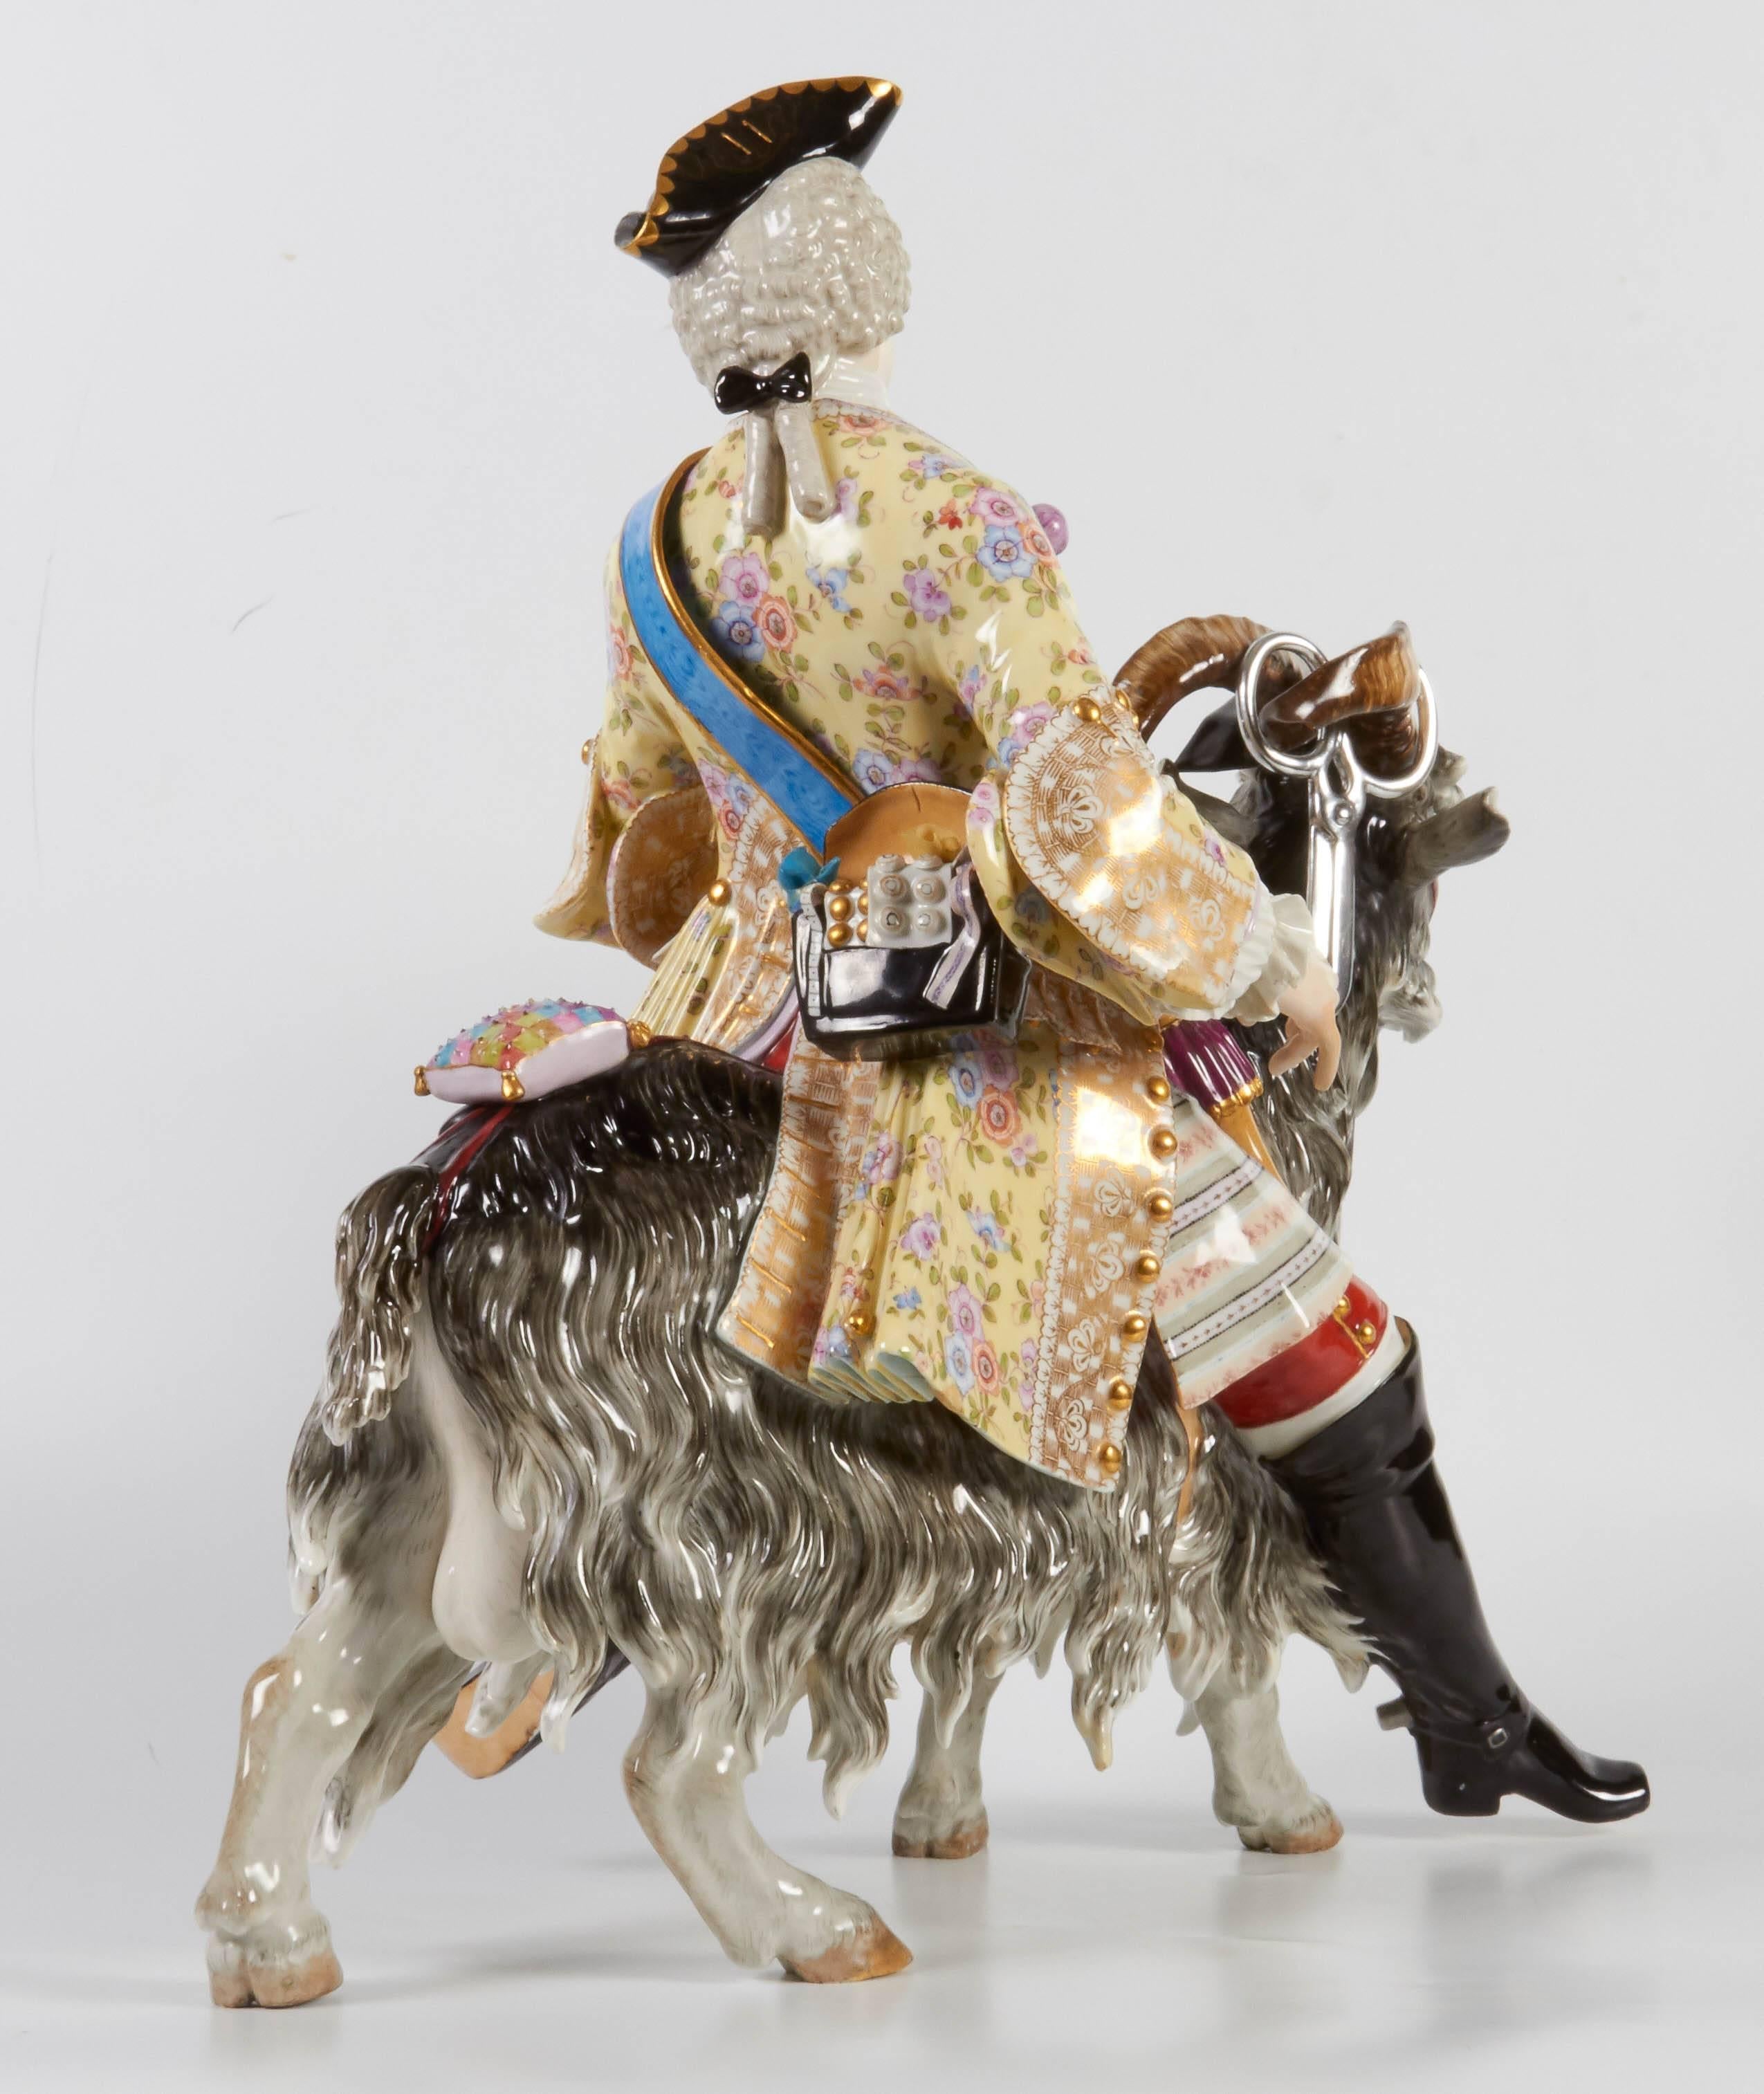 Porcelain Large Meissen Model of Count Bruhl's Tailor on the Goat, circa Mid-Late 1800s